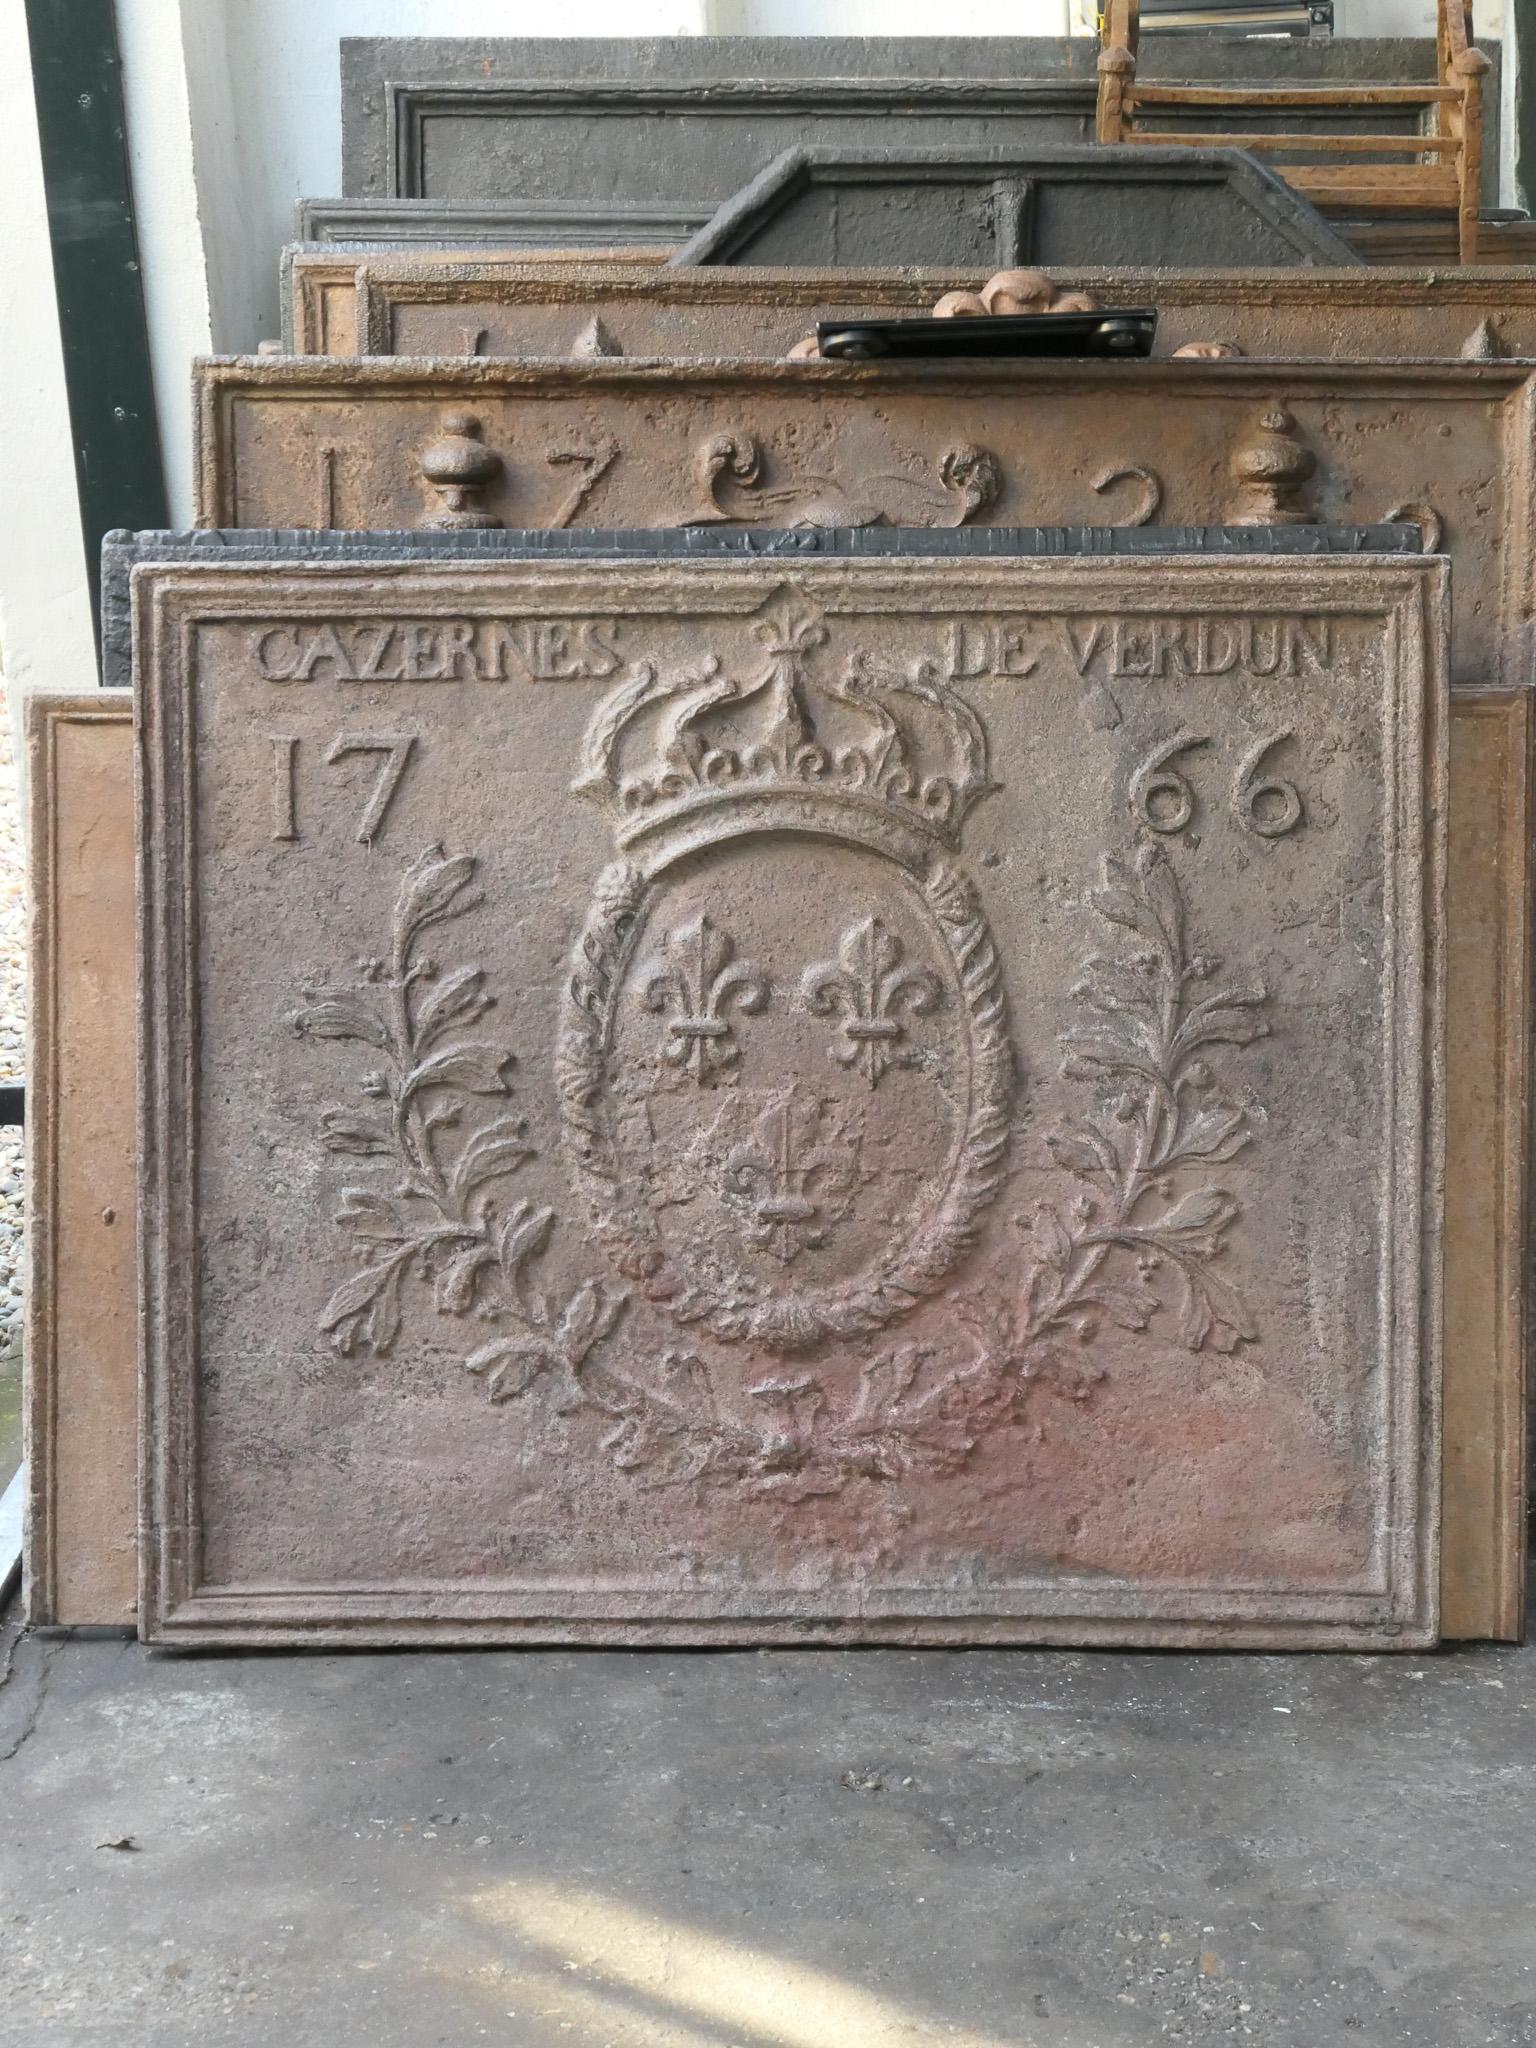 Beautiful 18th century French Louis XIV fireback with the arms of France. This is the coat of arms of the House of Bourbon, an originally French royal house that became a major dynasty in Europe. It delivered kings for Spain (Navarra), France, both